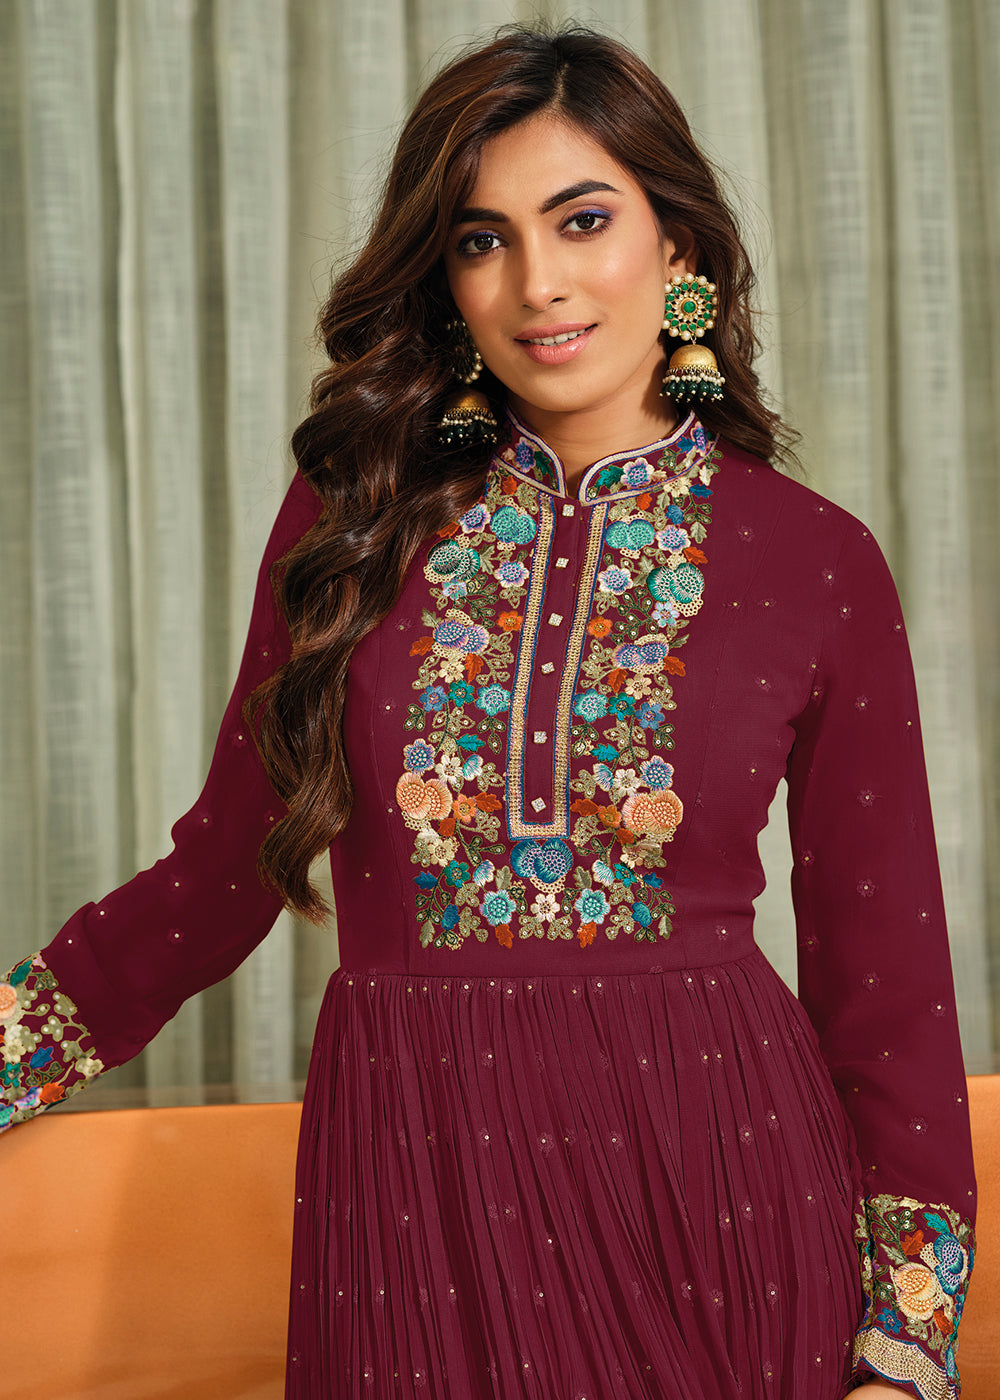 Buy Now Plum Purple Flower Embroidered Georgette Anarkali Dress Online in USA, UK, Australia, New Zealand, Canada & Worldwide at Empress Clothing. 